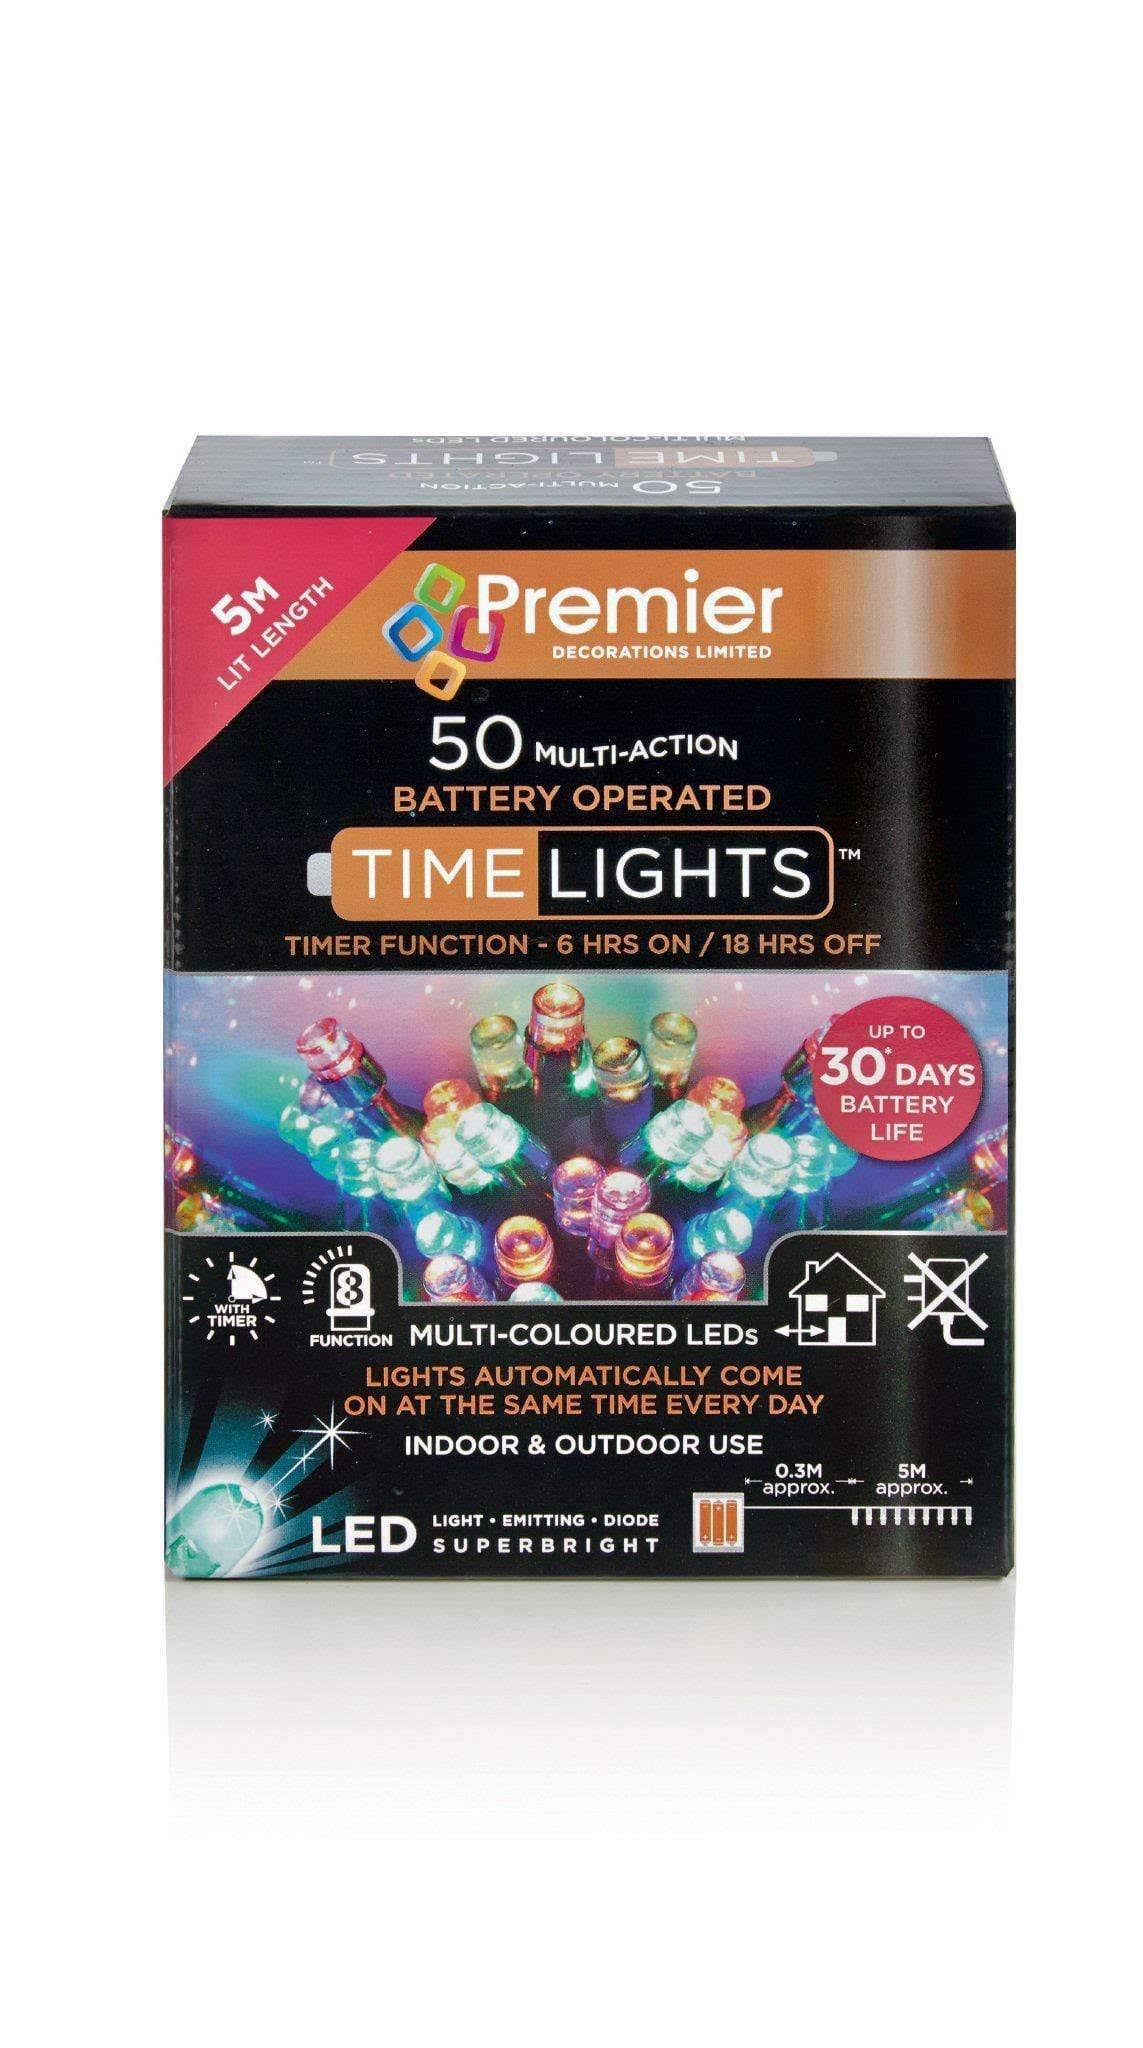 Premier 50 Multi-Action Battery Operated Coloured LED Lights